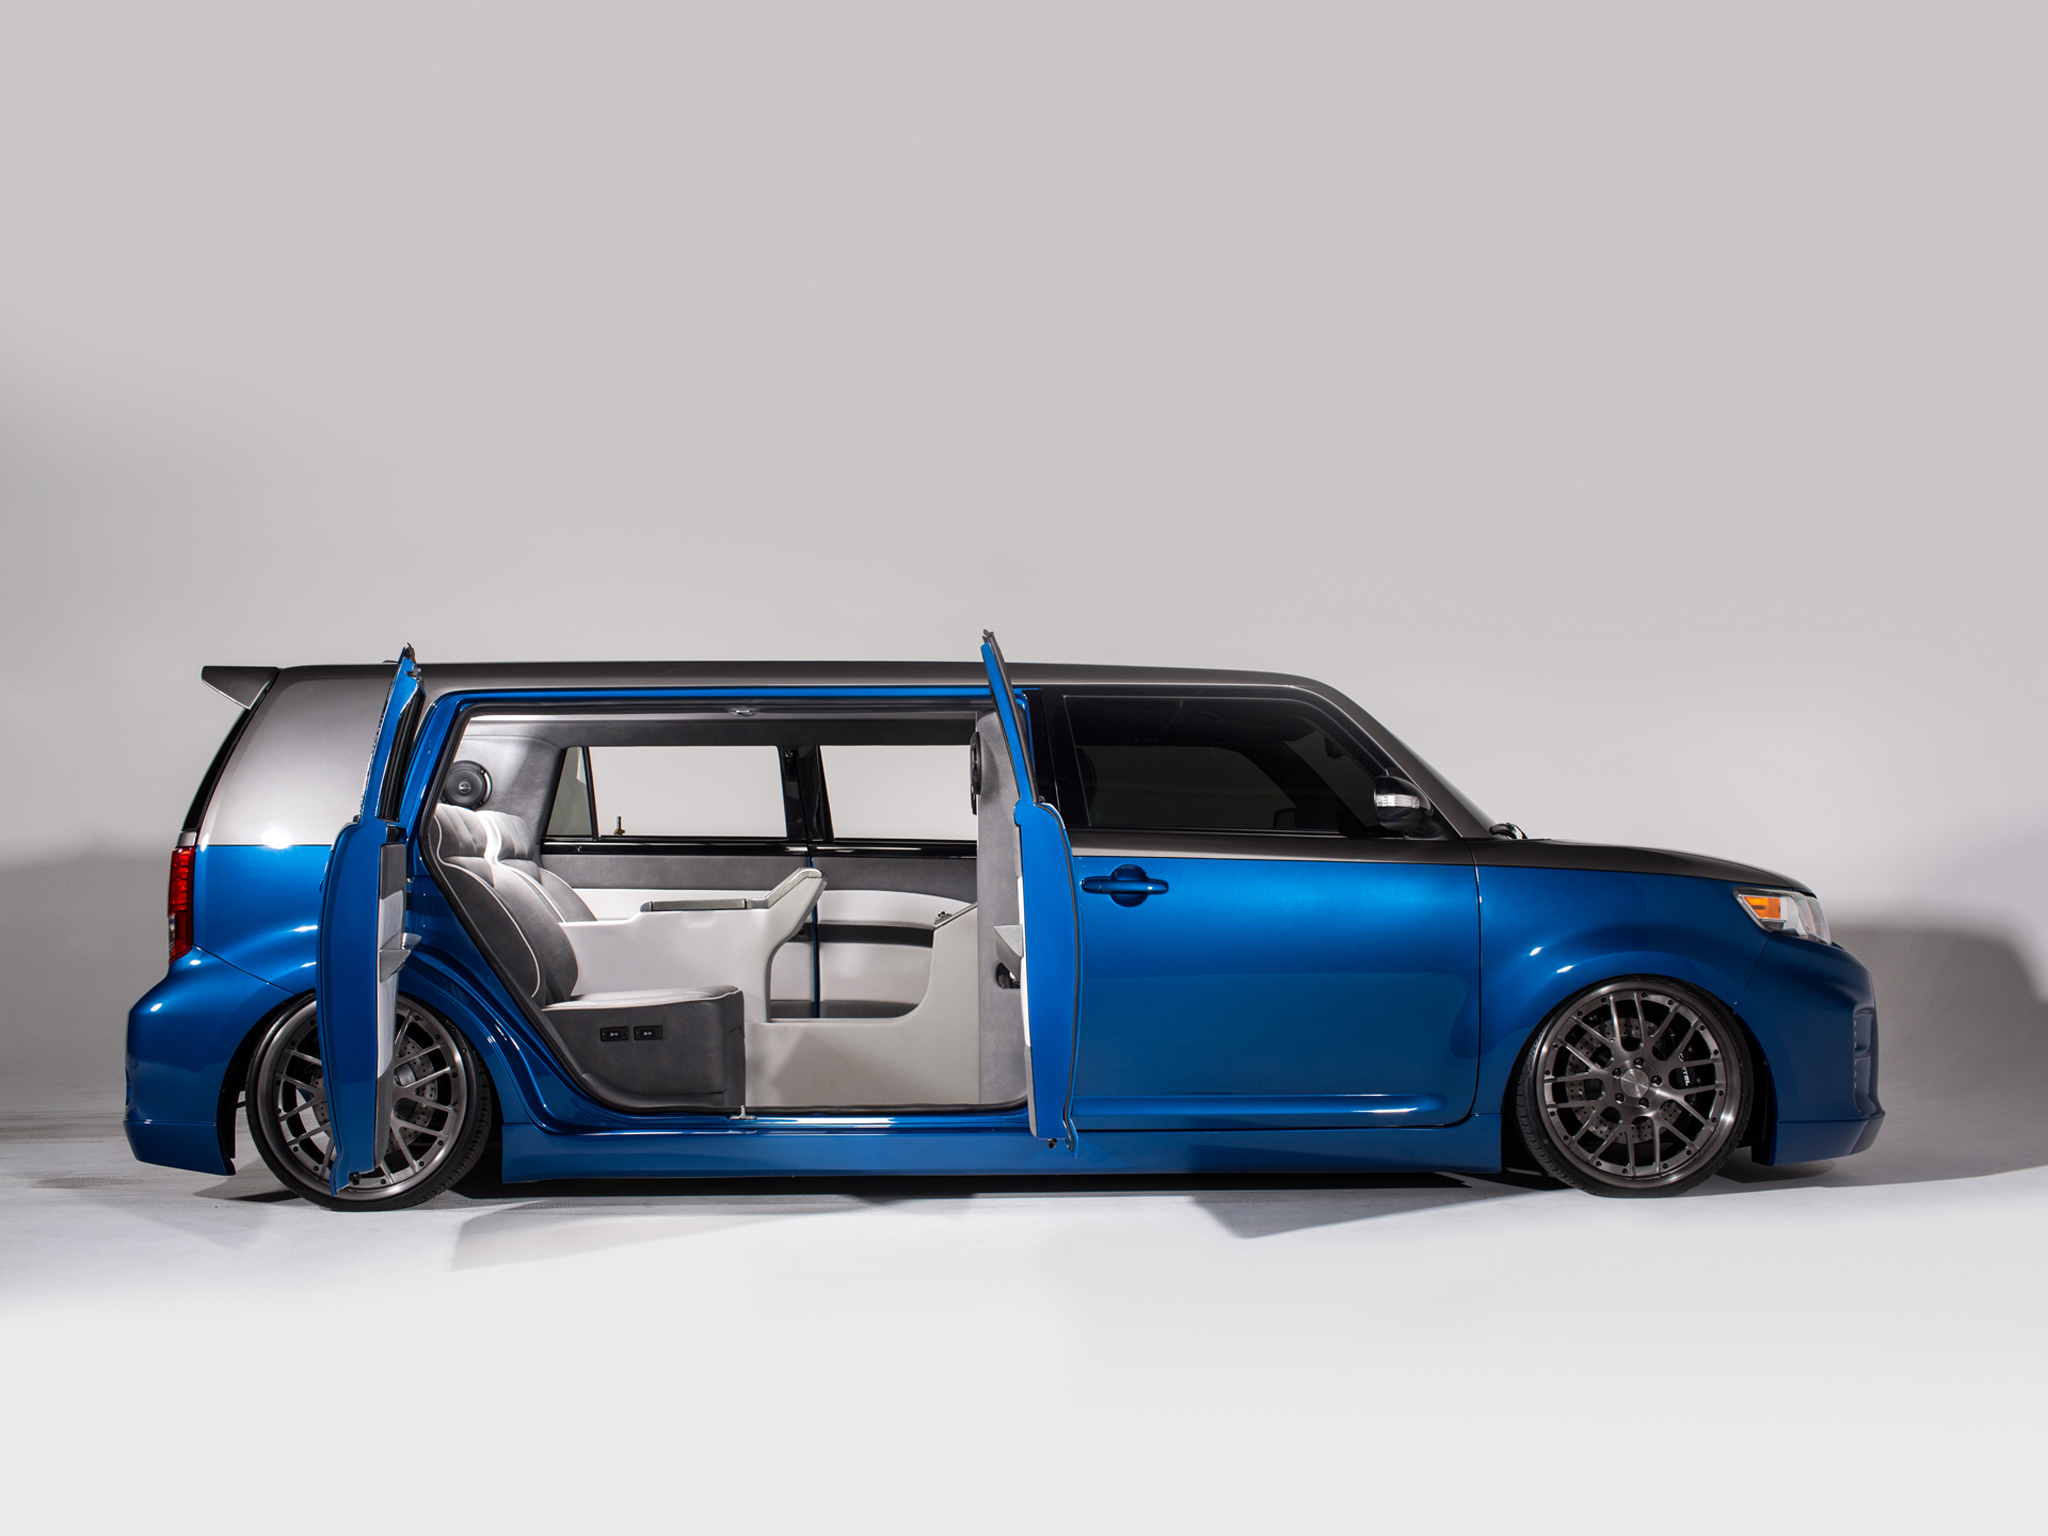 2014, Scion, Xb, Strictly, Business, Cartel, Limousine, Tuning, Suv, Interior Wallpaper